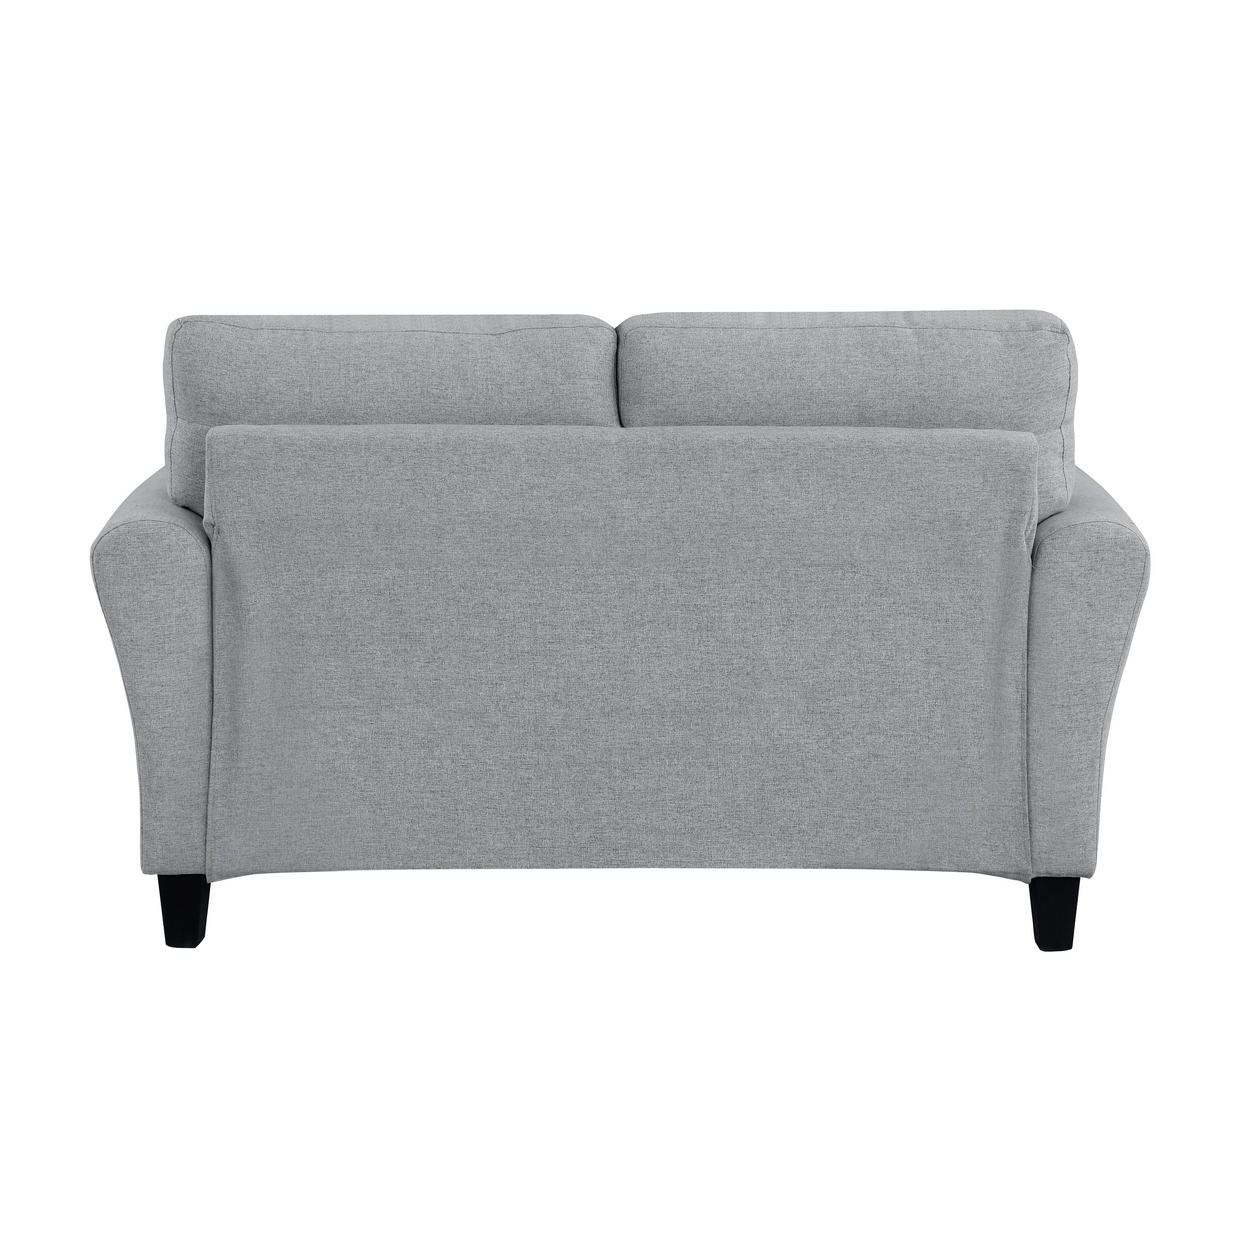 Engi 58 Inch Accent Loveseat, Smooth Gray Polyester, Attached Back Cushion- Saltoro Sherpi